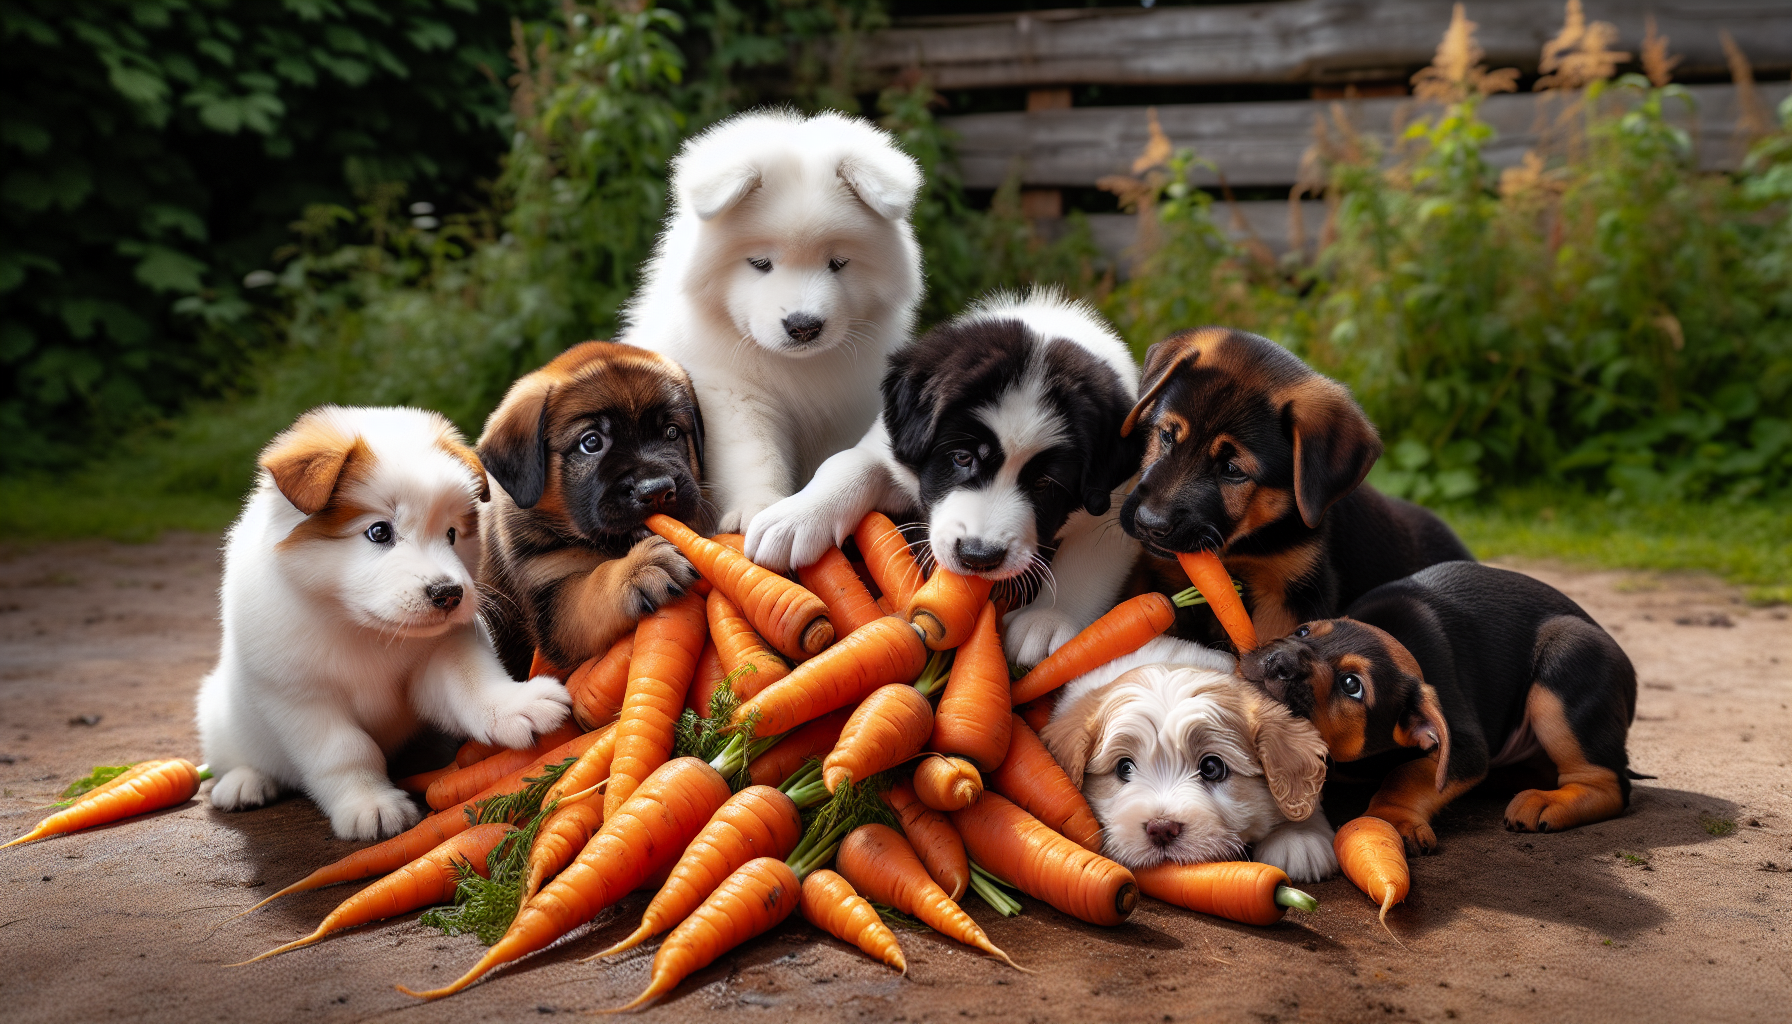 Puppies with carrots, cute dog gathering.